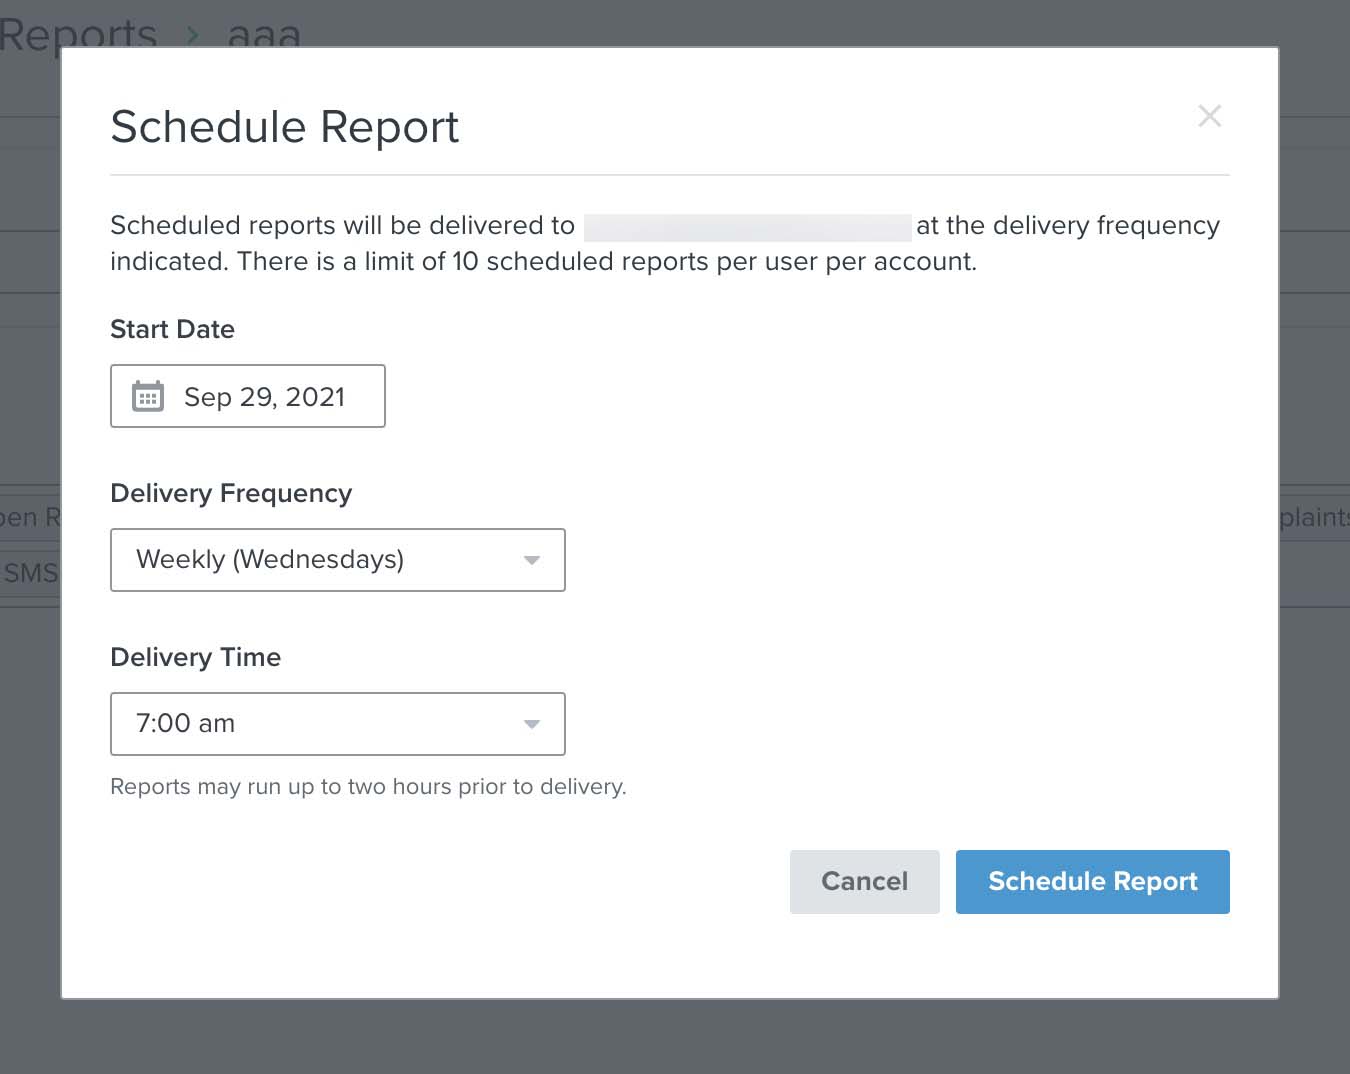 The schedule report modal with start date calendar picker, and dropdowns for delivery frequency and delivery time